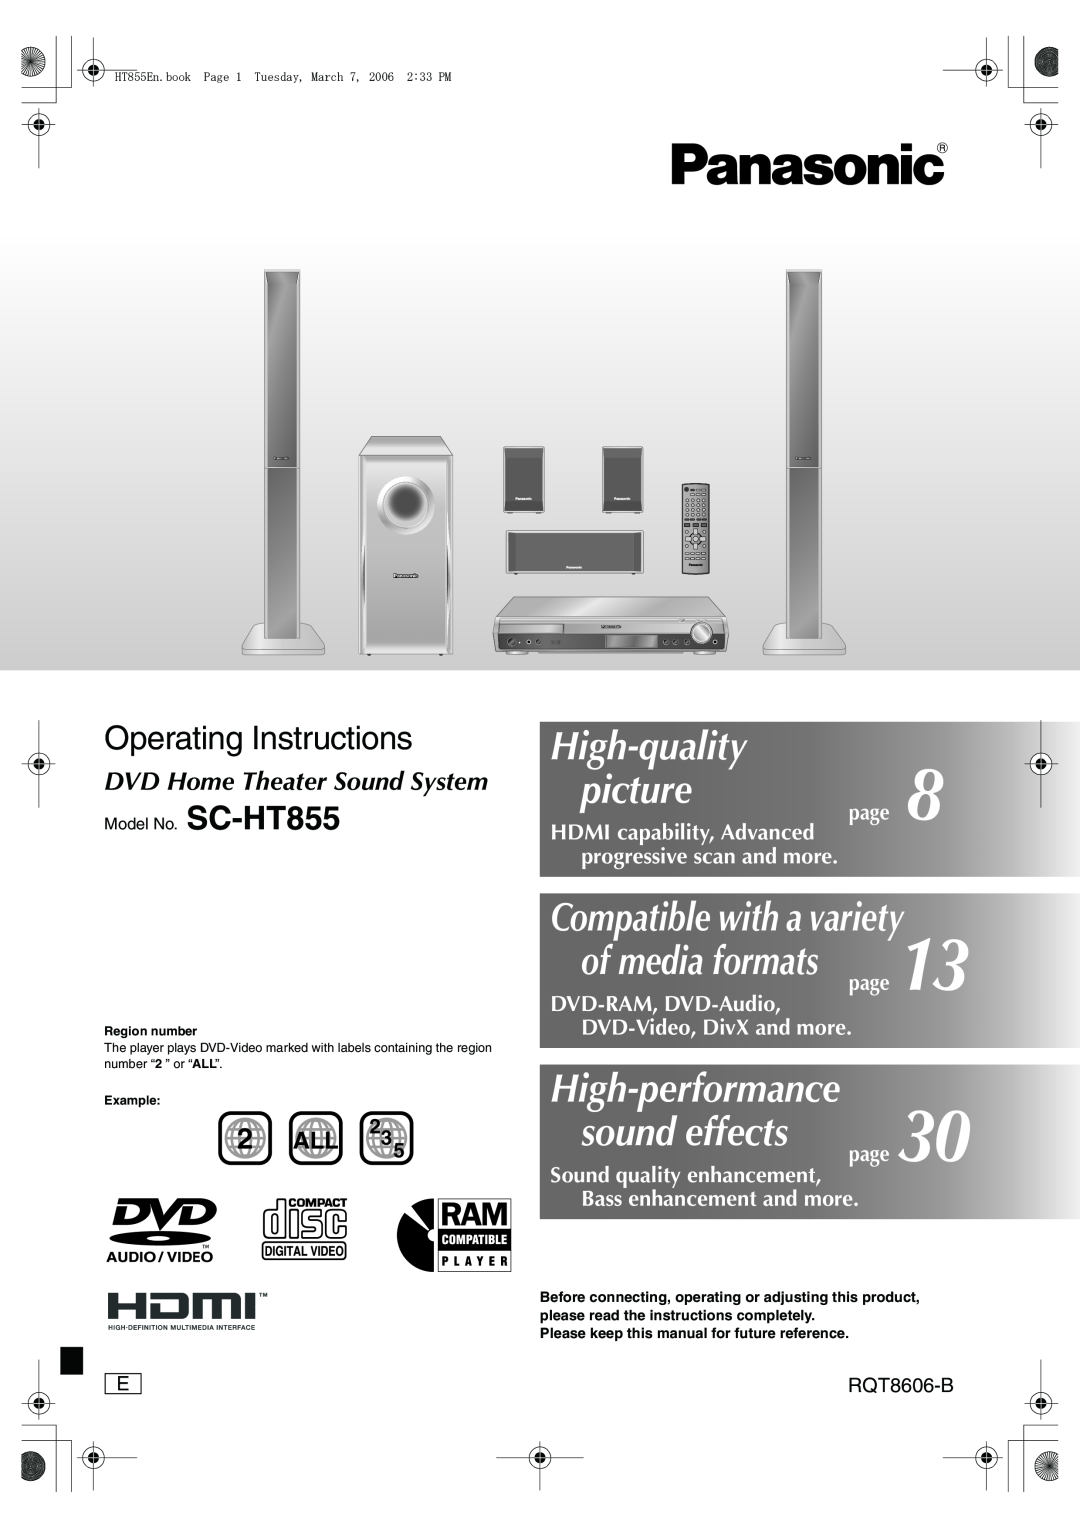 Panasonic SC-HT855 manual DVD Home Theater Sound System, High-quality picture, Compatible with a variety, of media formats 